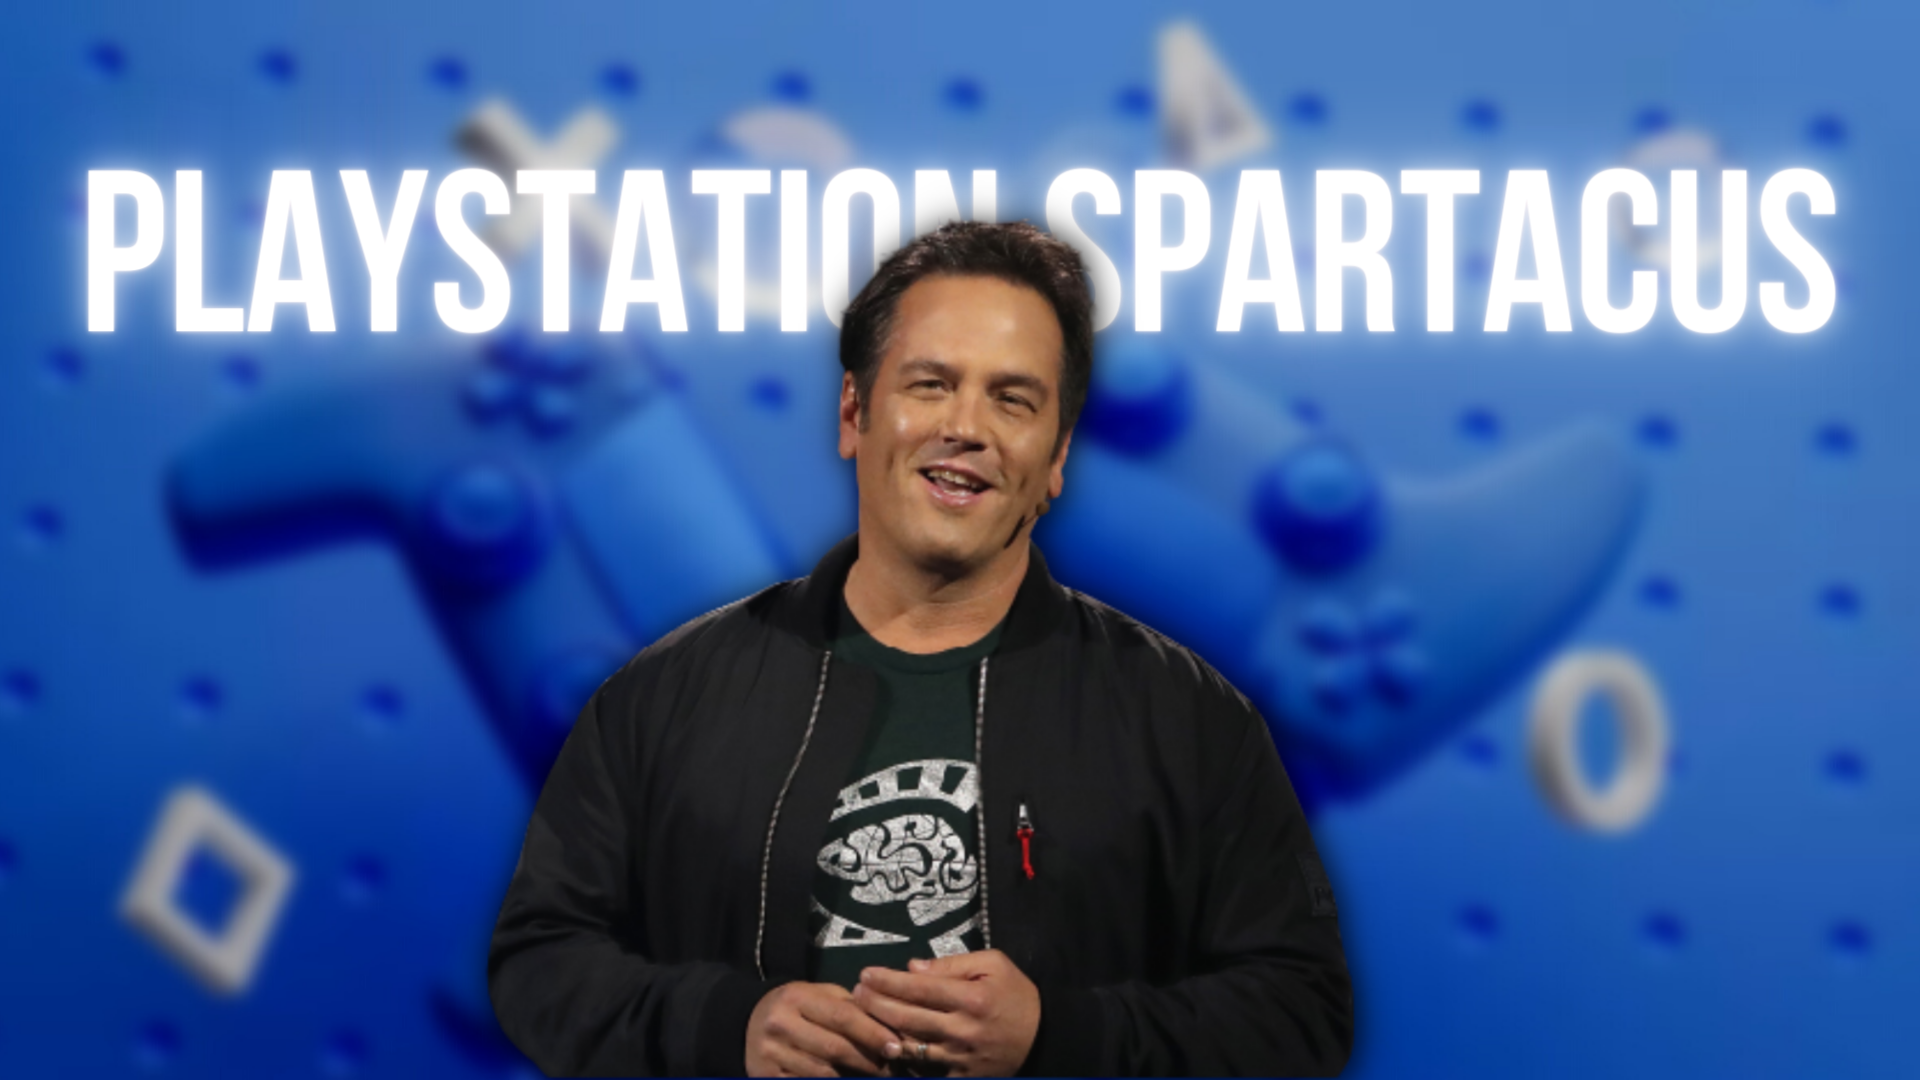 Xbox Phil Spencer Responds to "Spartacus" News, Sony's Game Pass Rival Was Inevitable